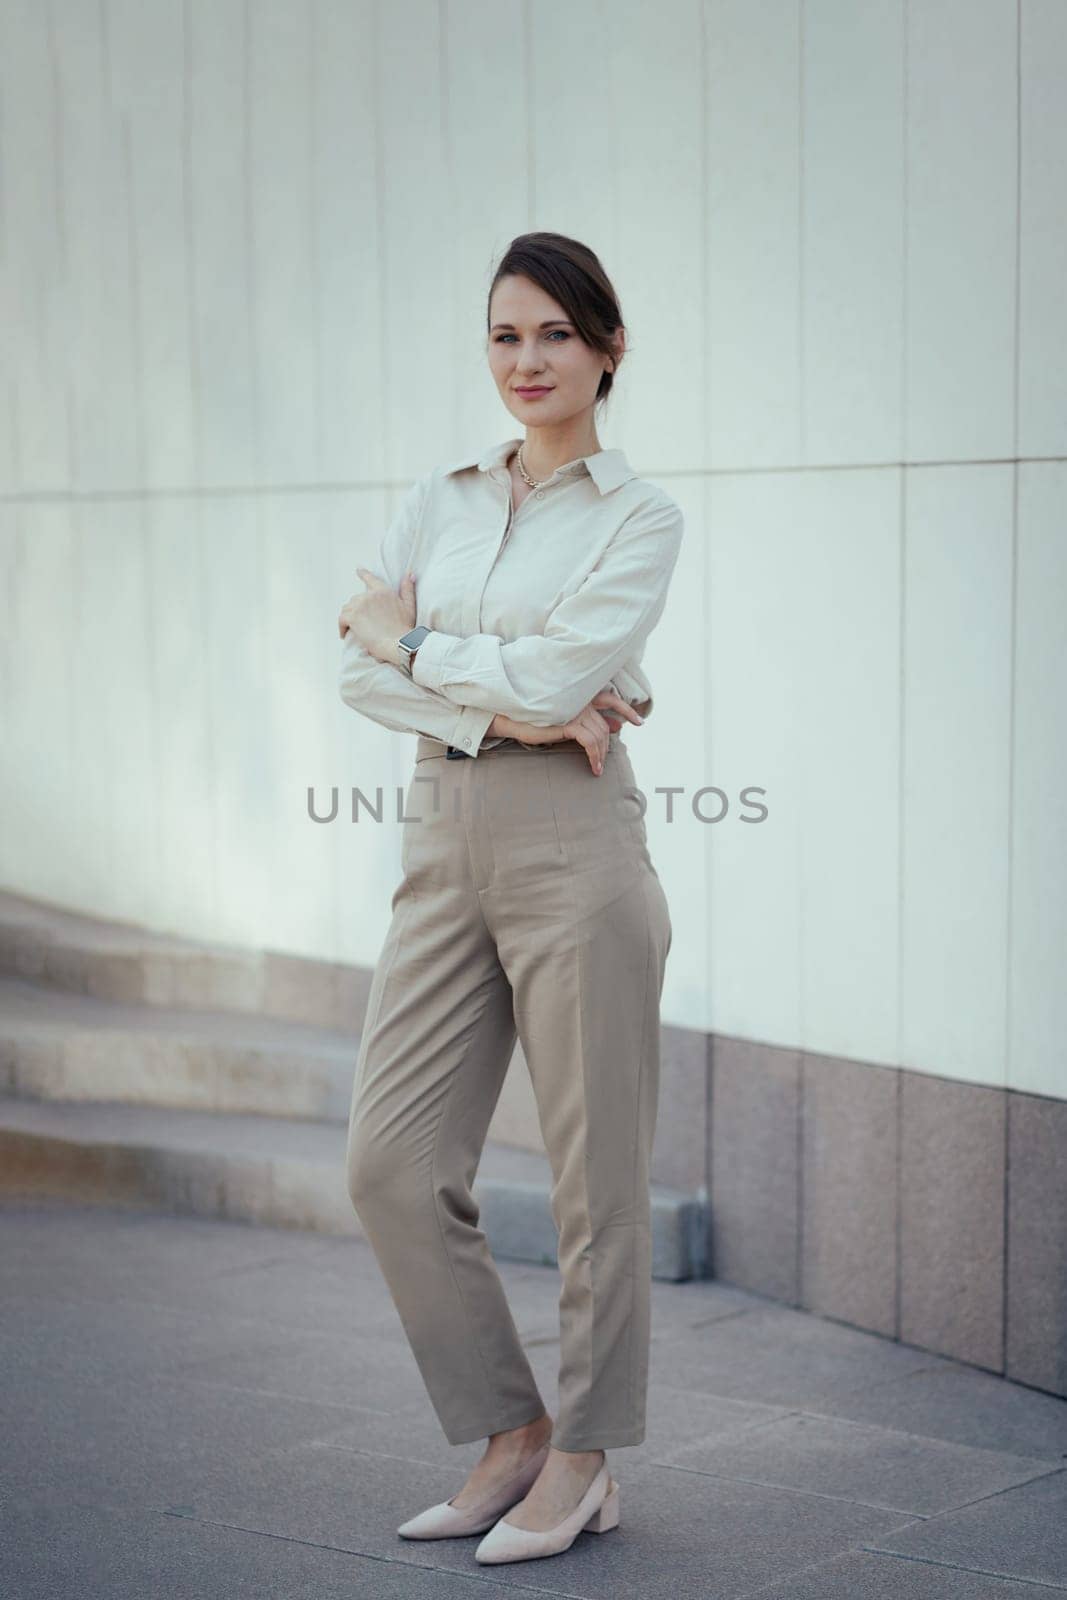 Young caucasian woman in office or business fashion style pantsuit in beige tones.